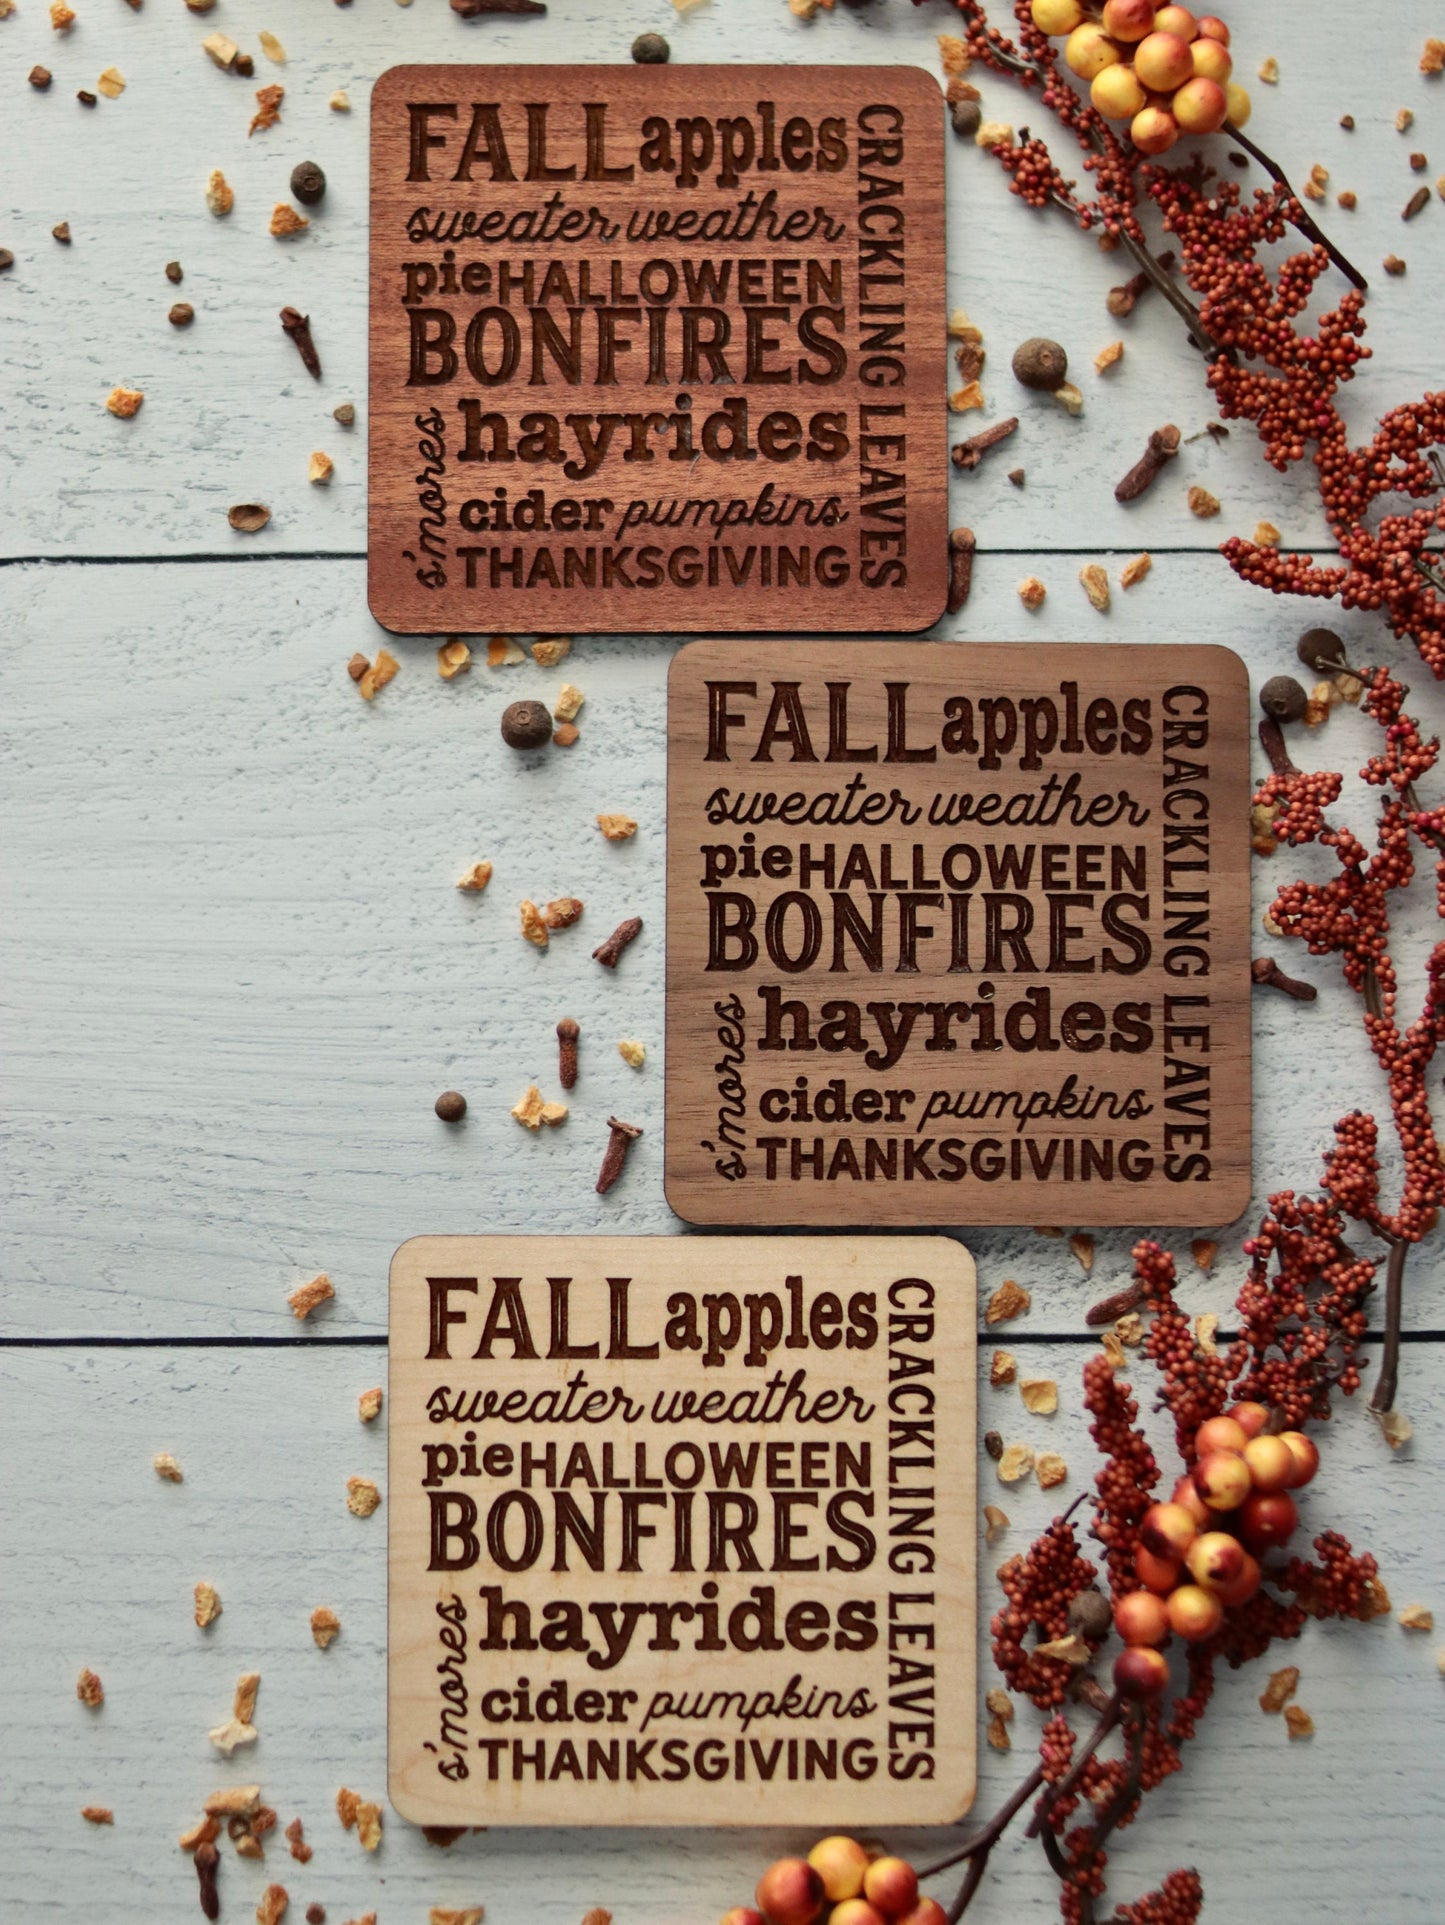 All Things Fall 4 coaster set, Apples, Bonfires, Cider, Halloween, Hayrides, Leaves, Pies, Pumpkins, Sweater Weather, S'mores, Thanksgiving